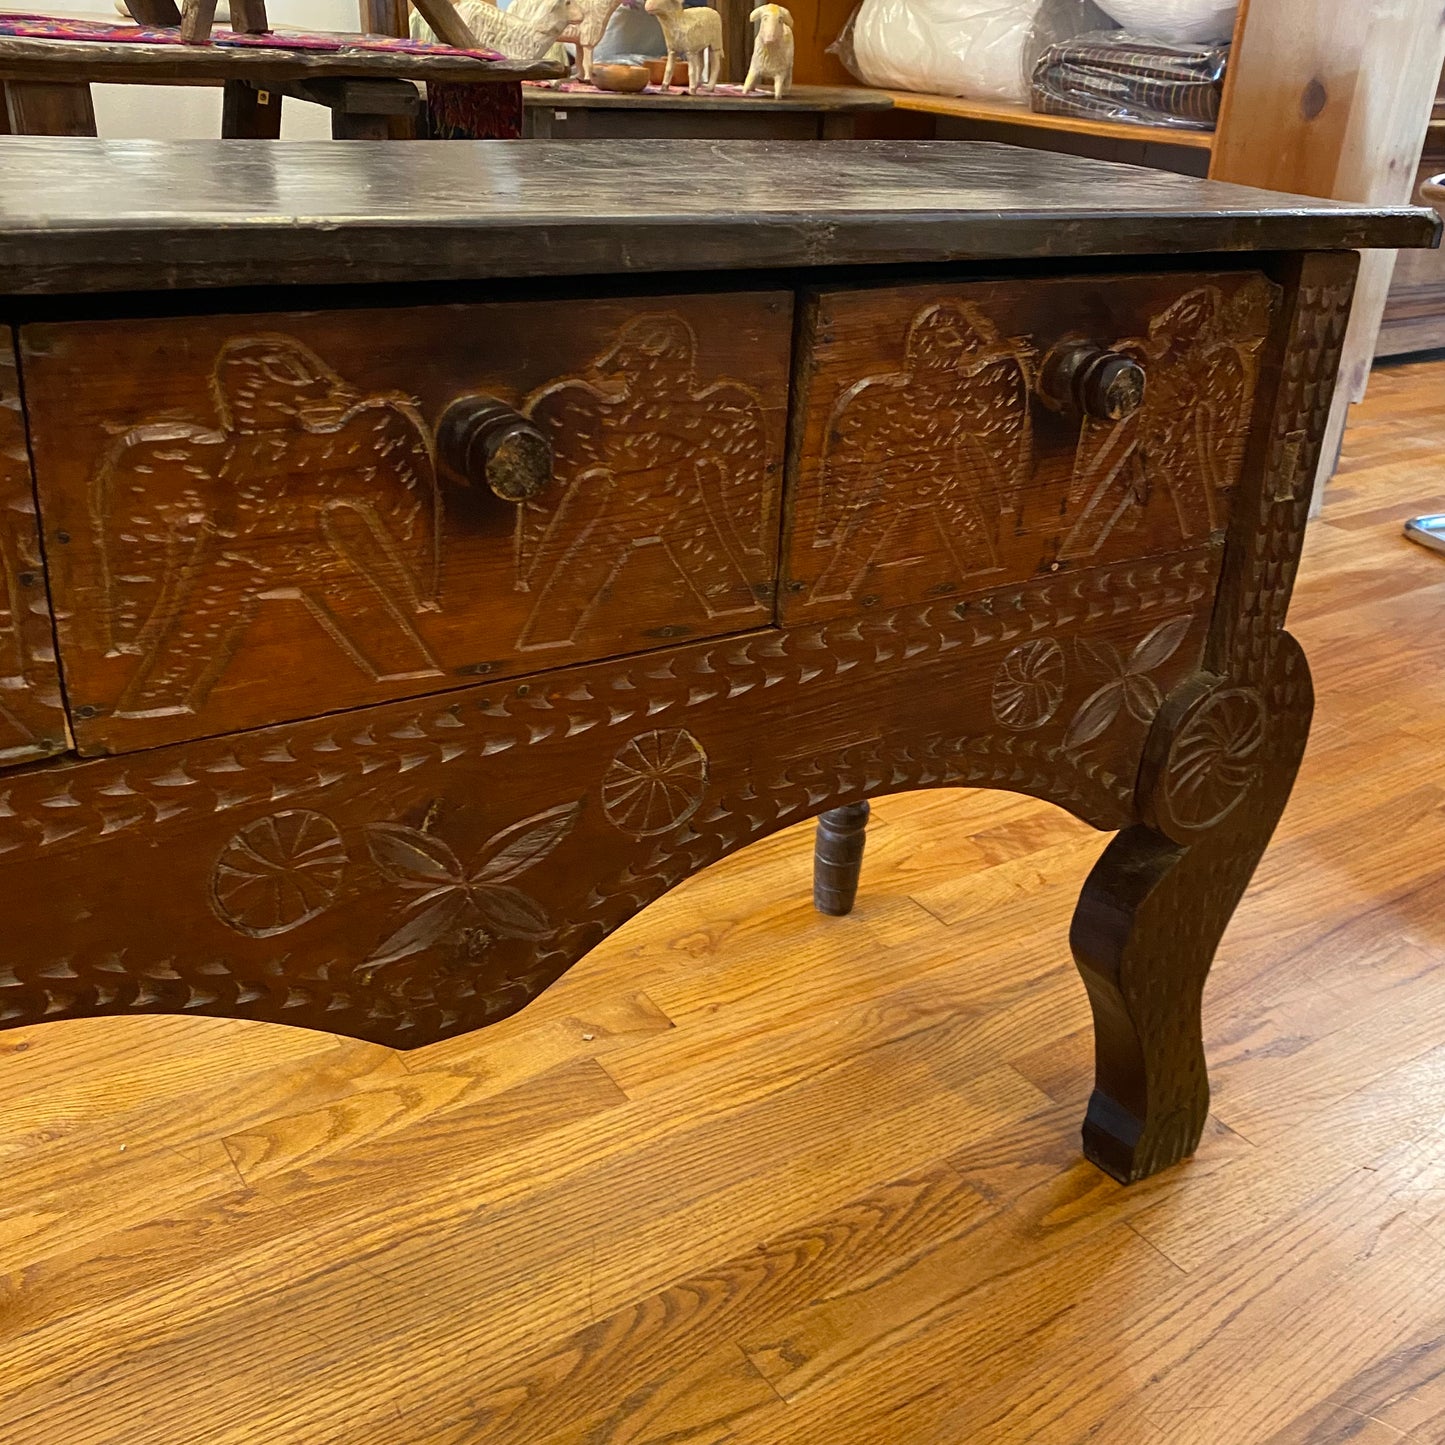 Wooden Console Table with Drawers and Carved Detail from Guatemala